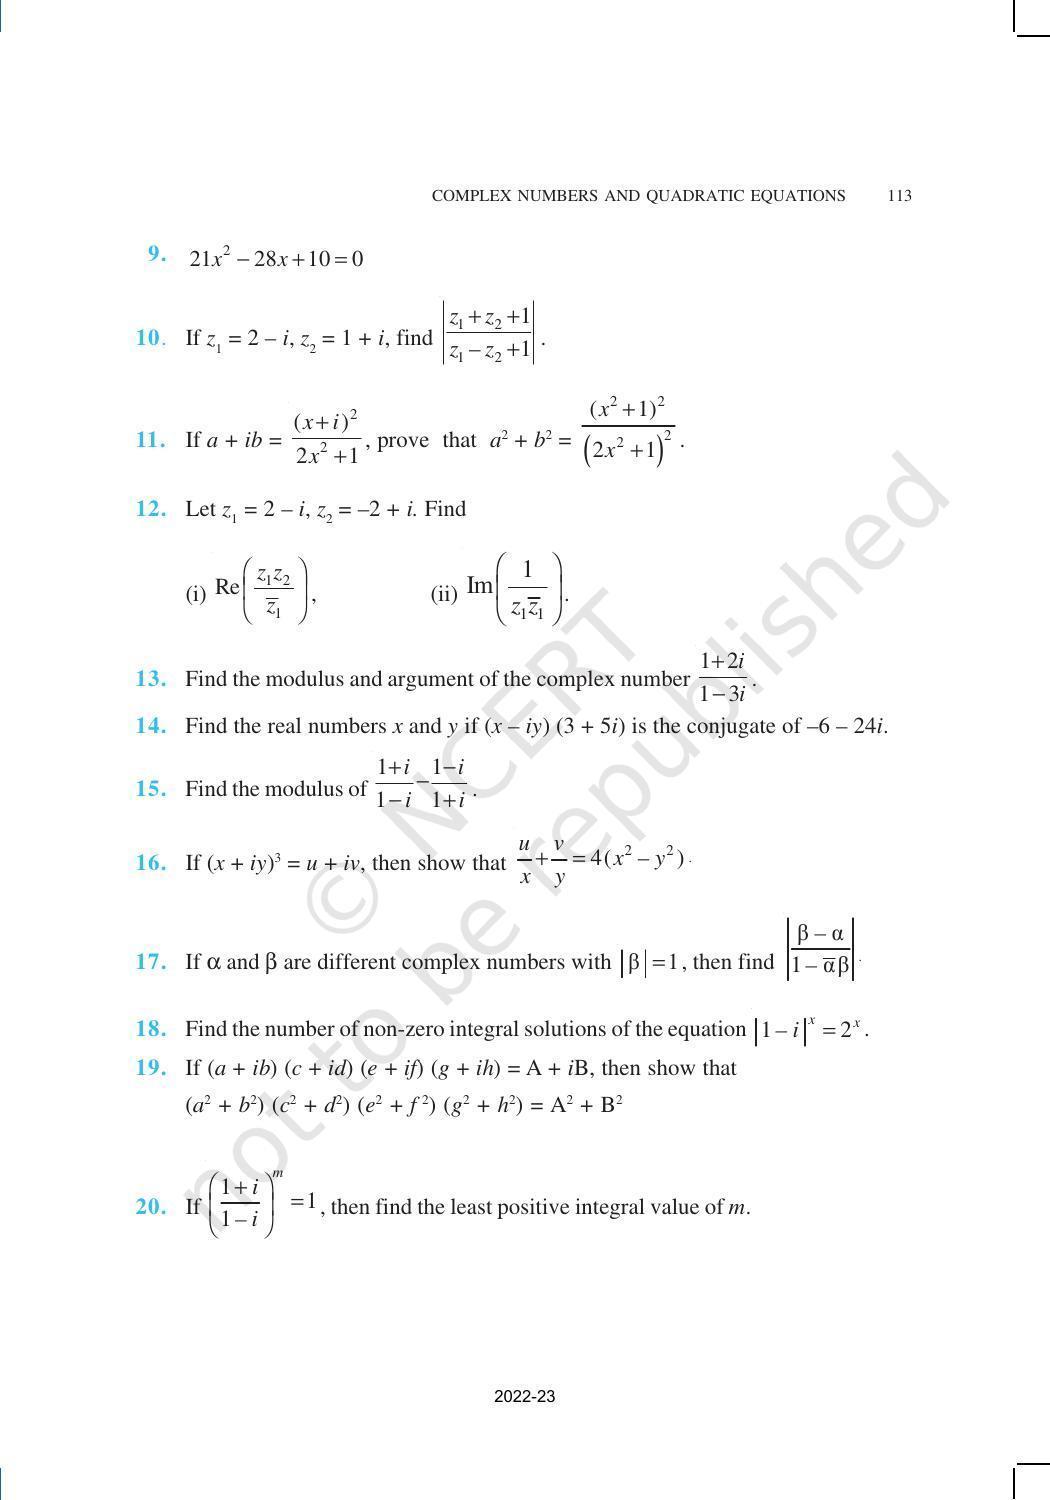 NCERT Book for Class 11 Maths Chapter 5 Complex Numbers and Quadratic Equations - Page 17